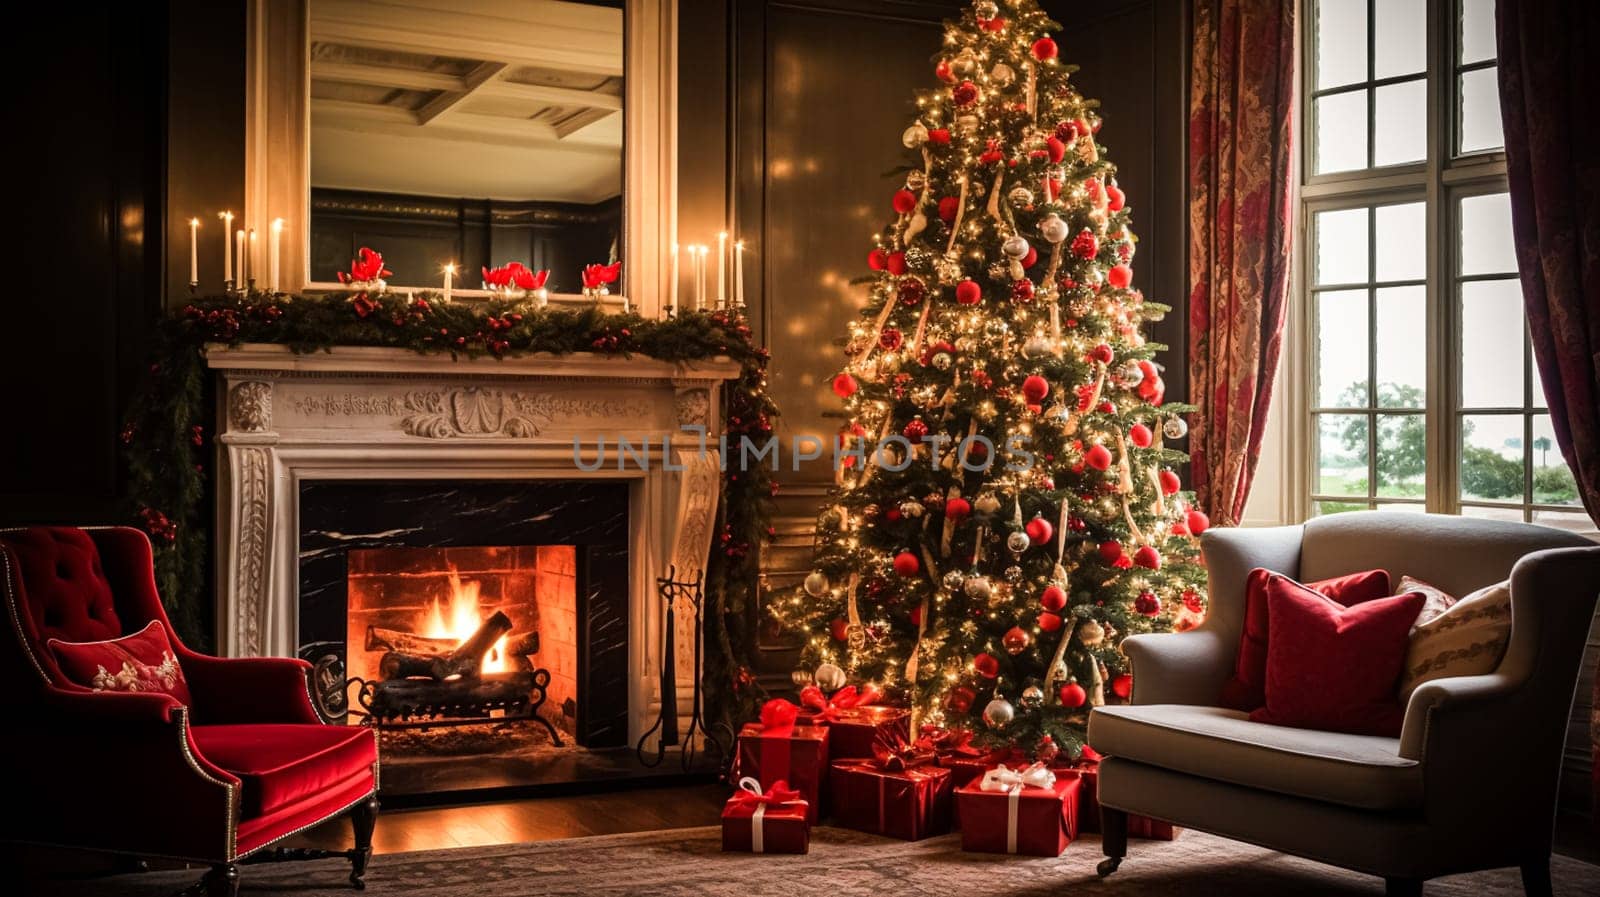 Christmas at the manor, English countryside decoration and interior decor by Anneleven